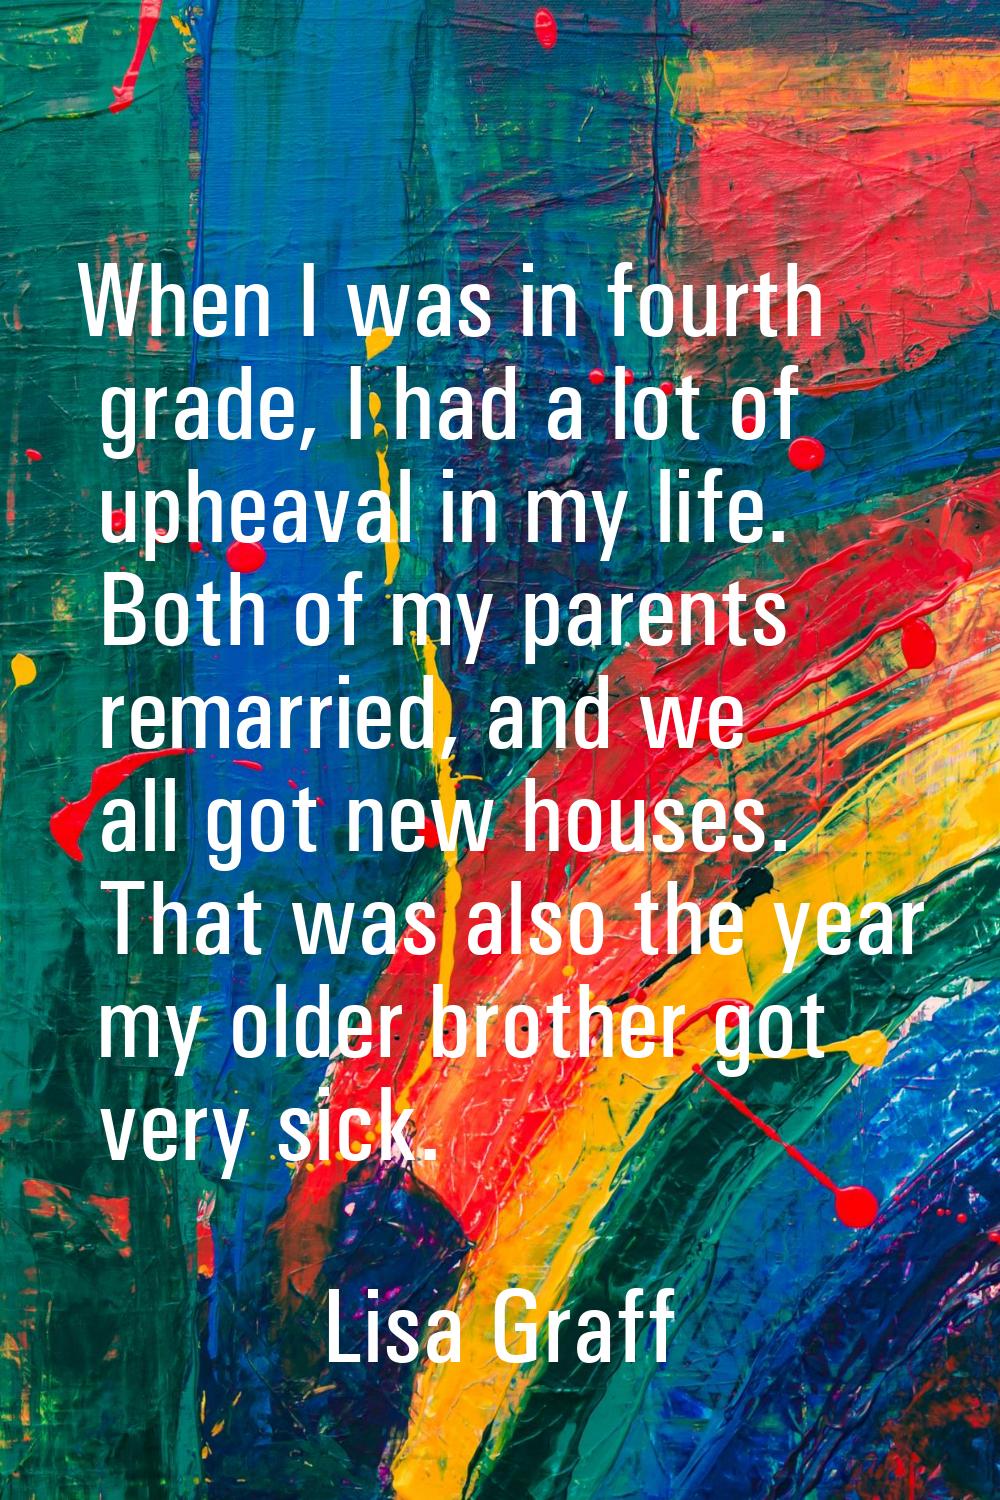 When I was in fourth grade, I had a lot of upheaval in my life. Both of my parents remarried, and w